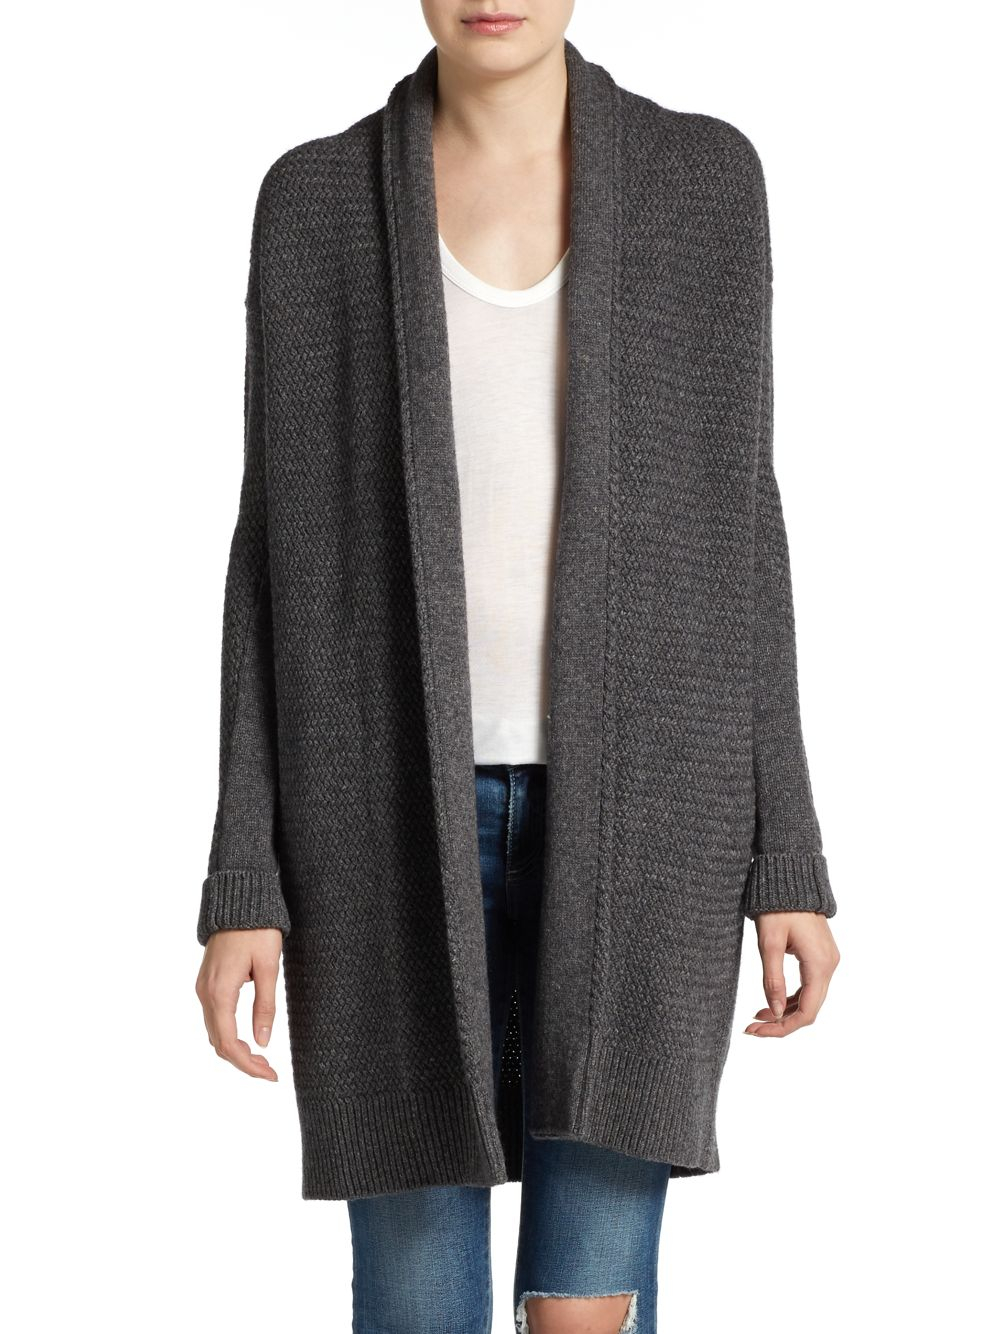 Vince Ribbed Yak Wool Cardigan in Gray - Lyst